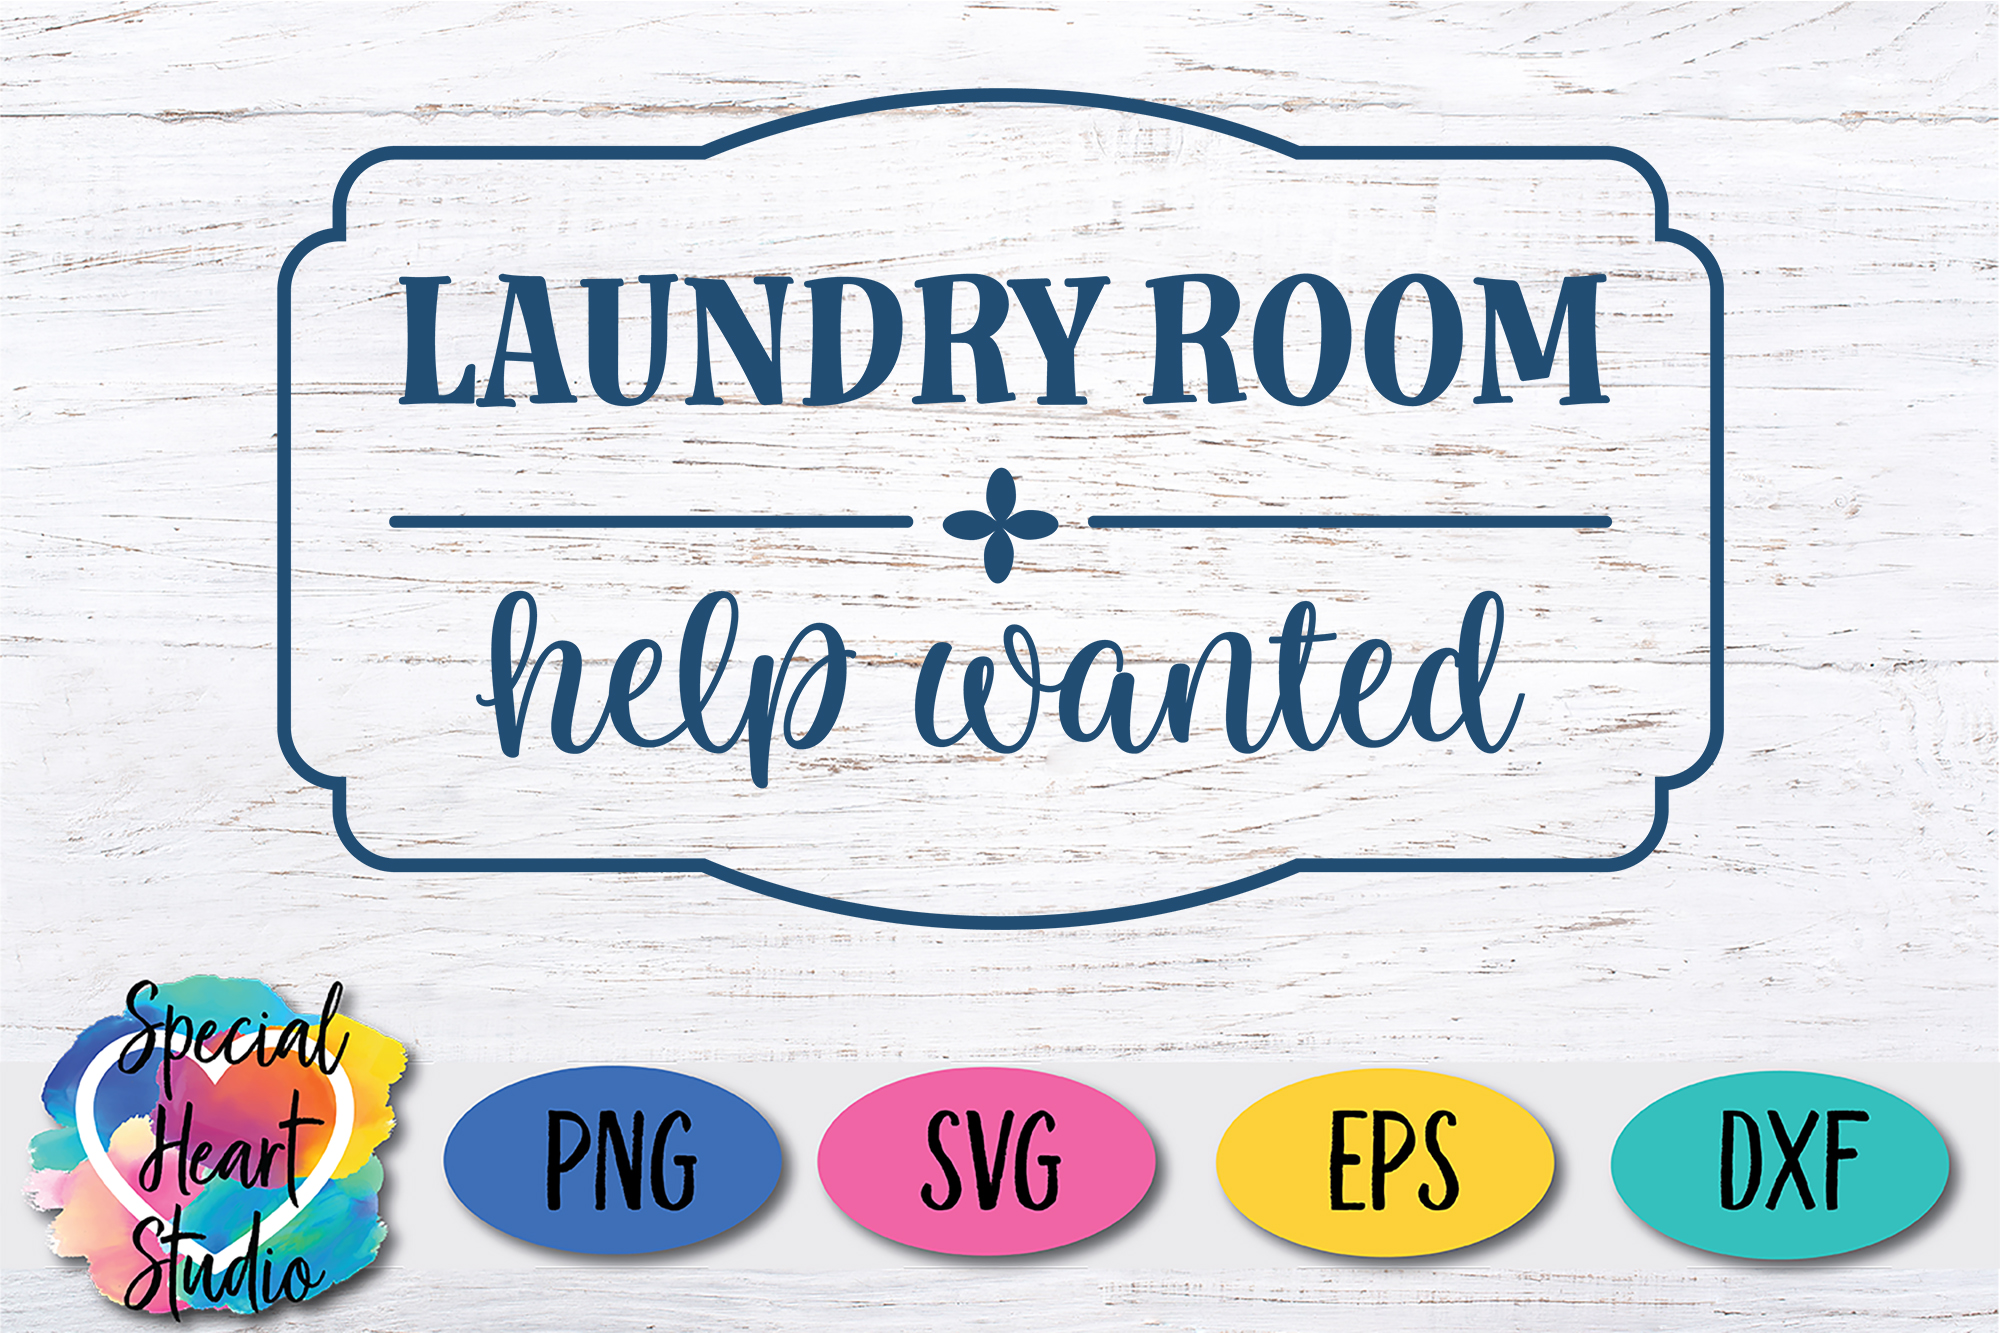 FREE SVG CUT FILE - LAUNDRY ROOM - SPECIAL HEART STUDIO